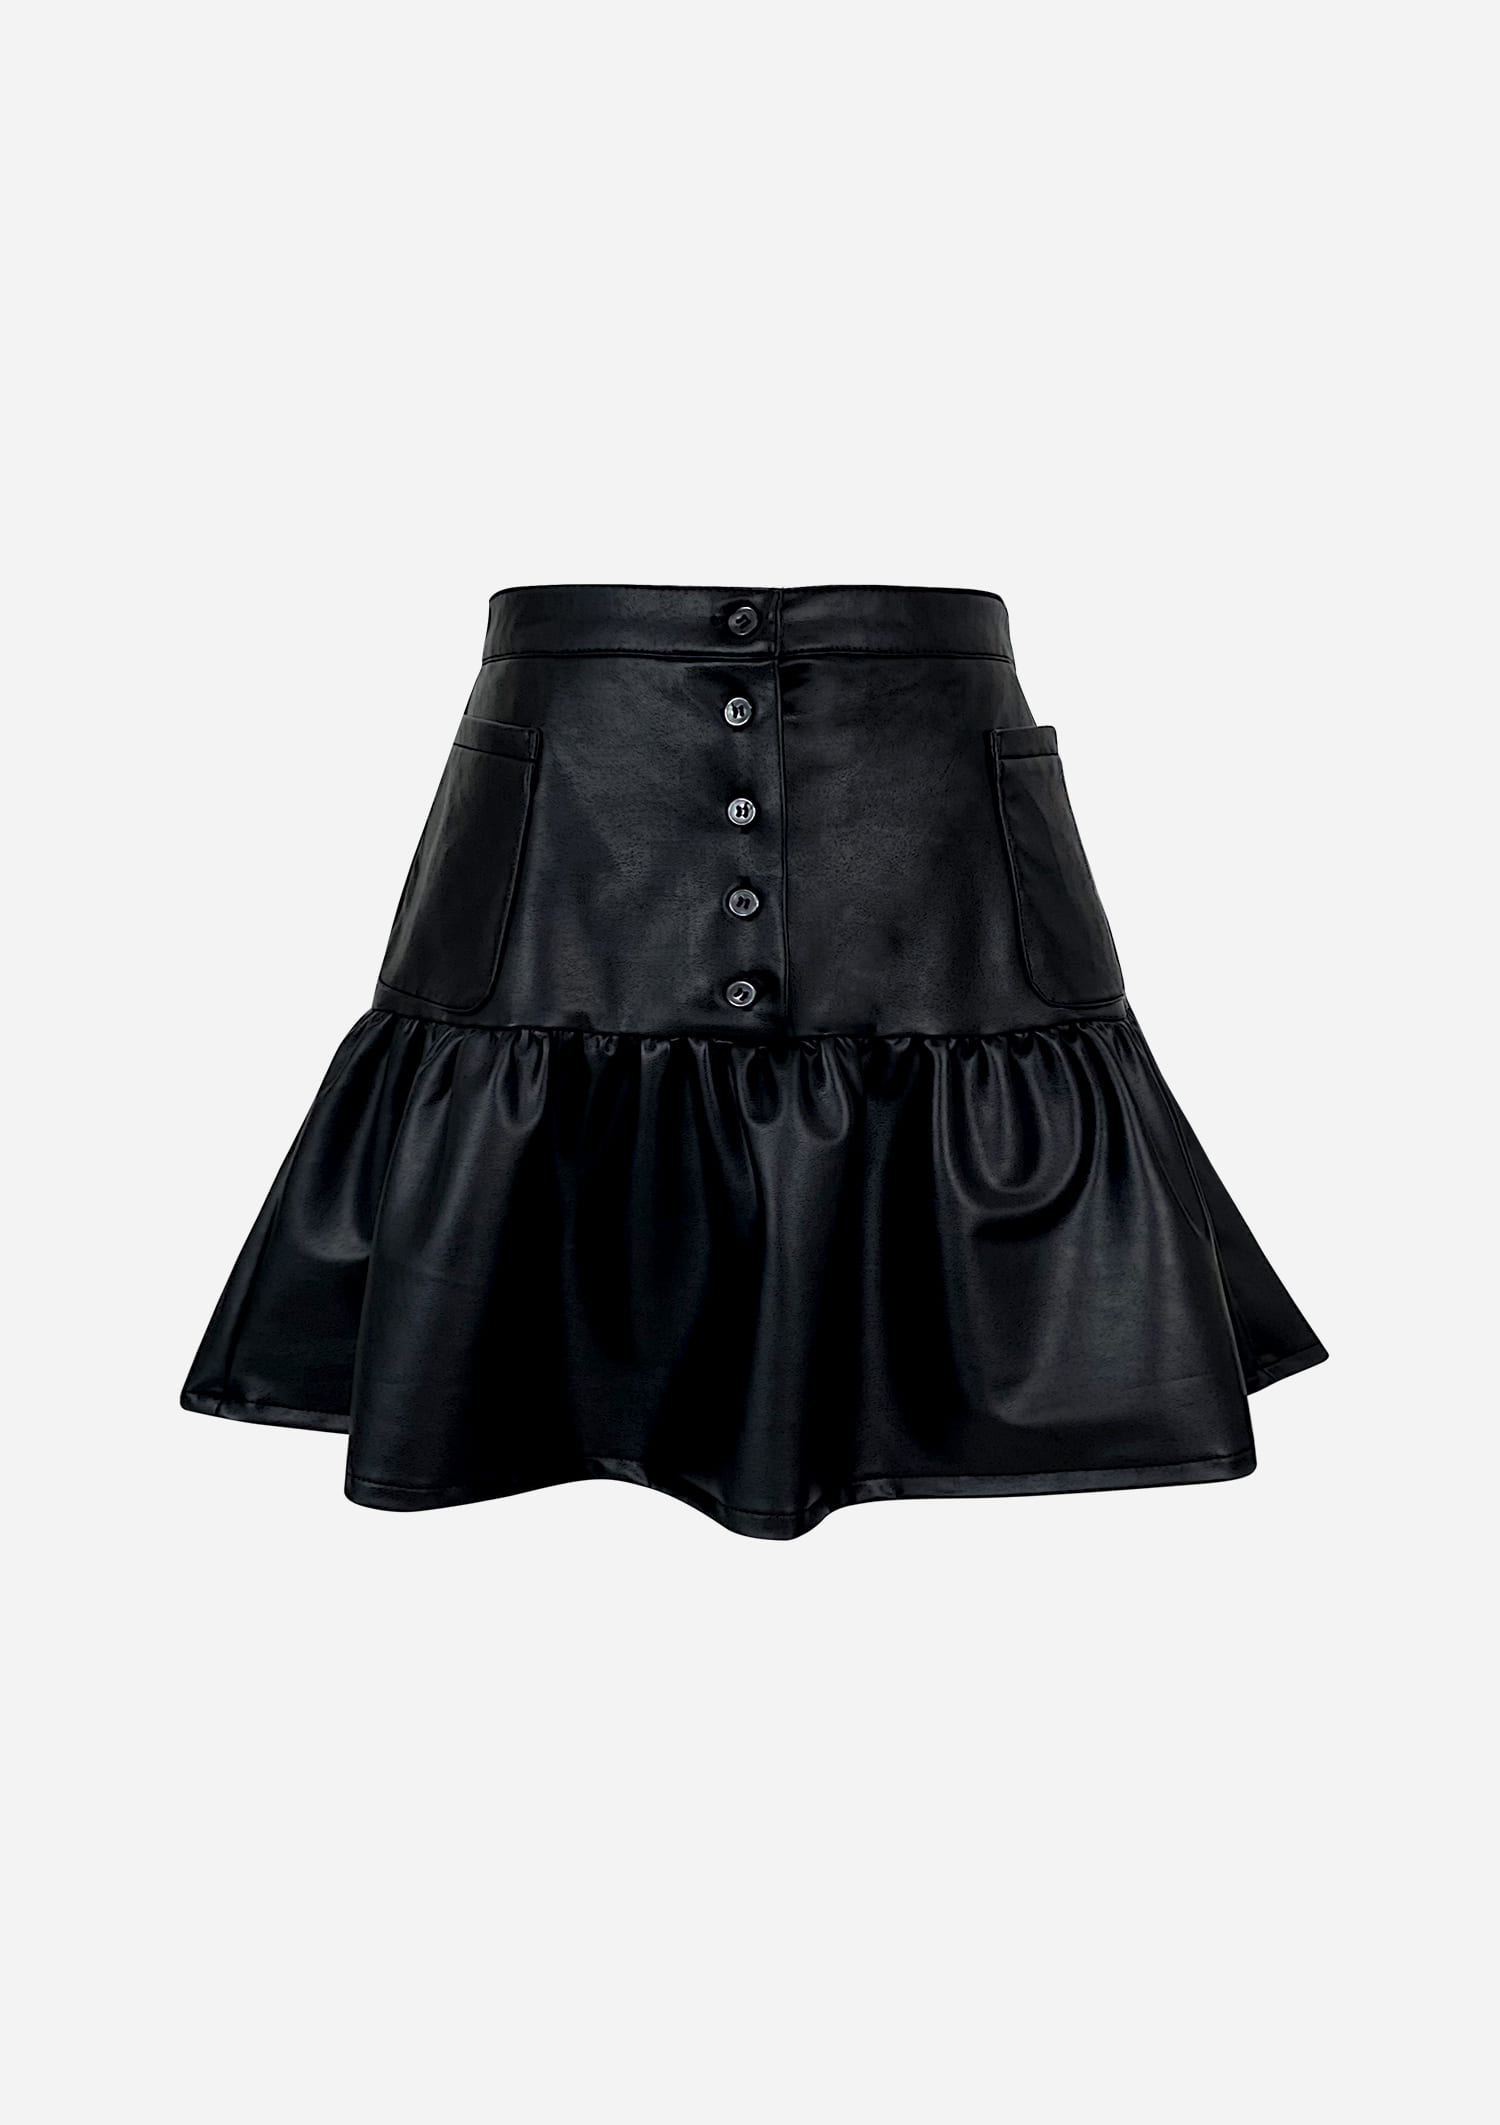 Leather Barbie skirts(part.2)